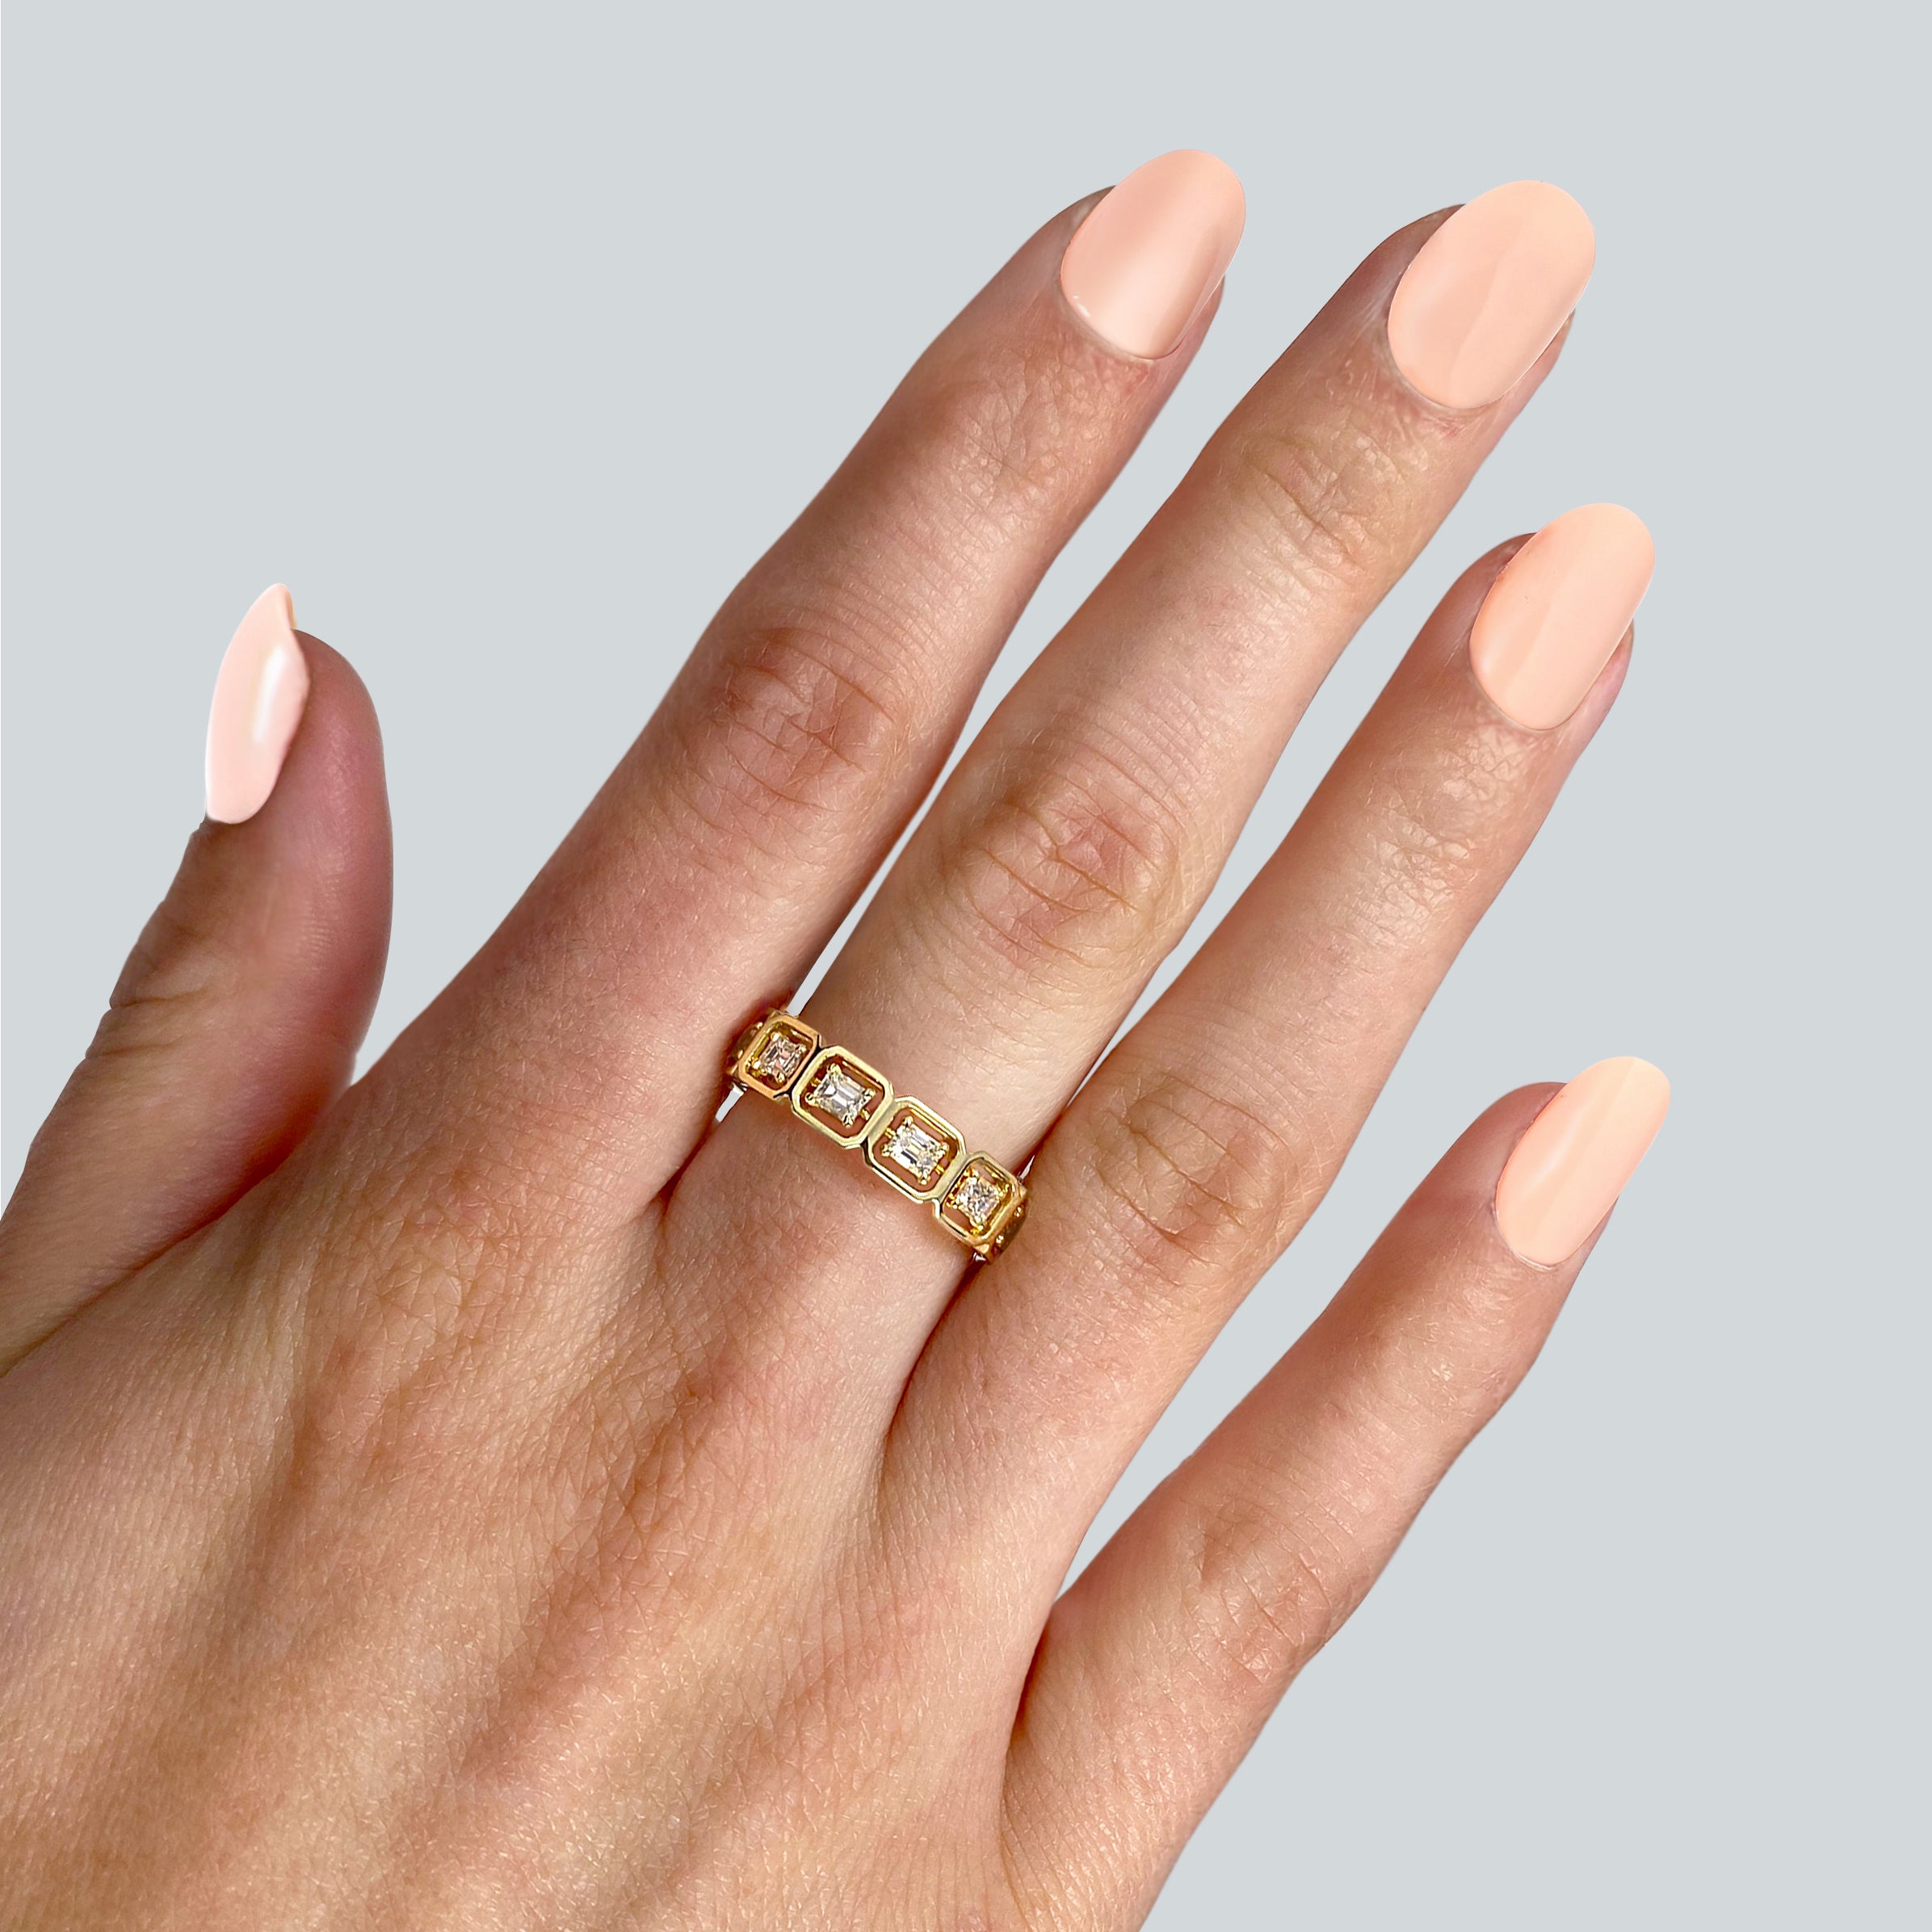 Shimansky - Women Wearing the Saturn Emerald Eternity Diamond Ring 1.00ct crafted in 14K Yellow Gold